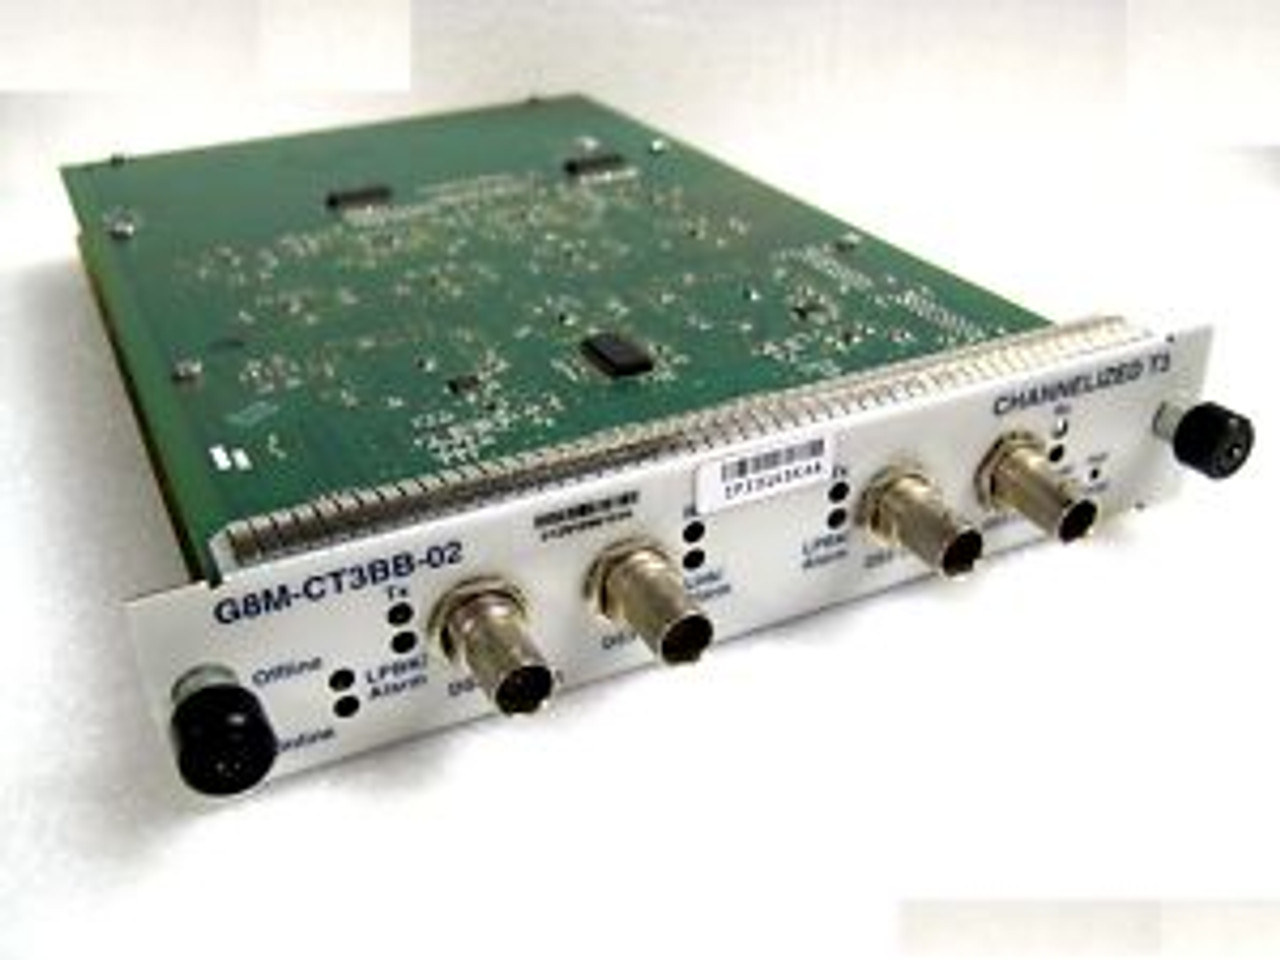 Riverstone Networks G8M-CT3BB-02 T3 Module RS8600